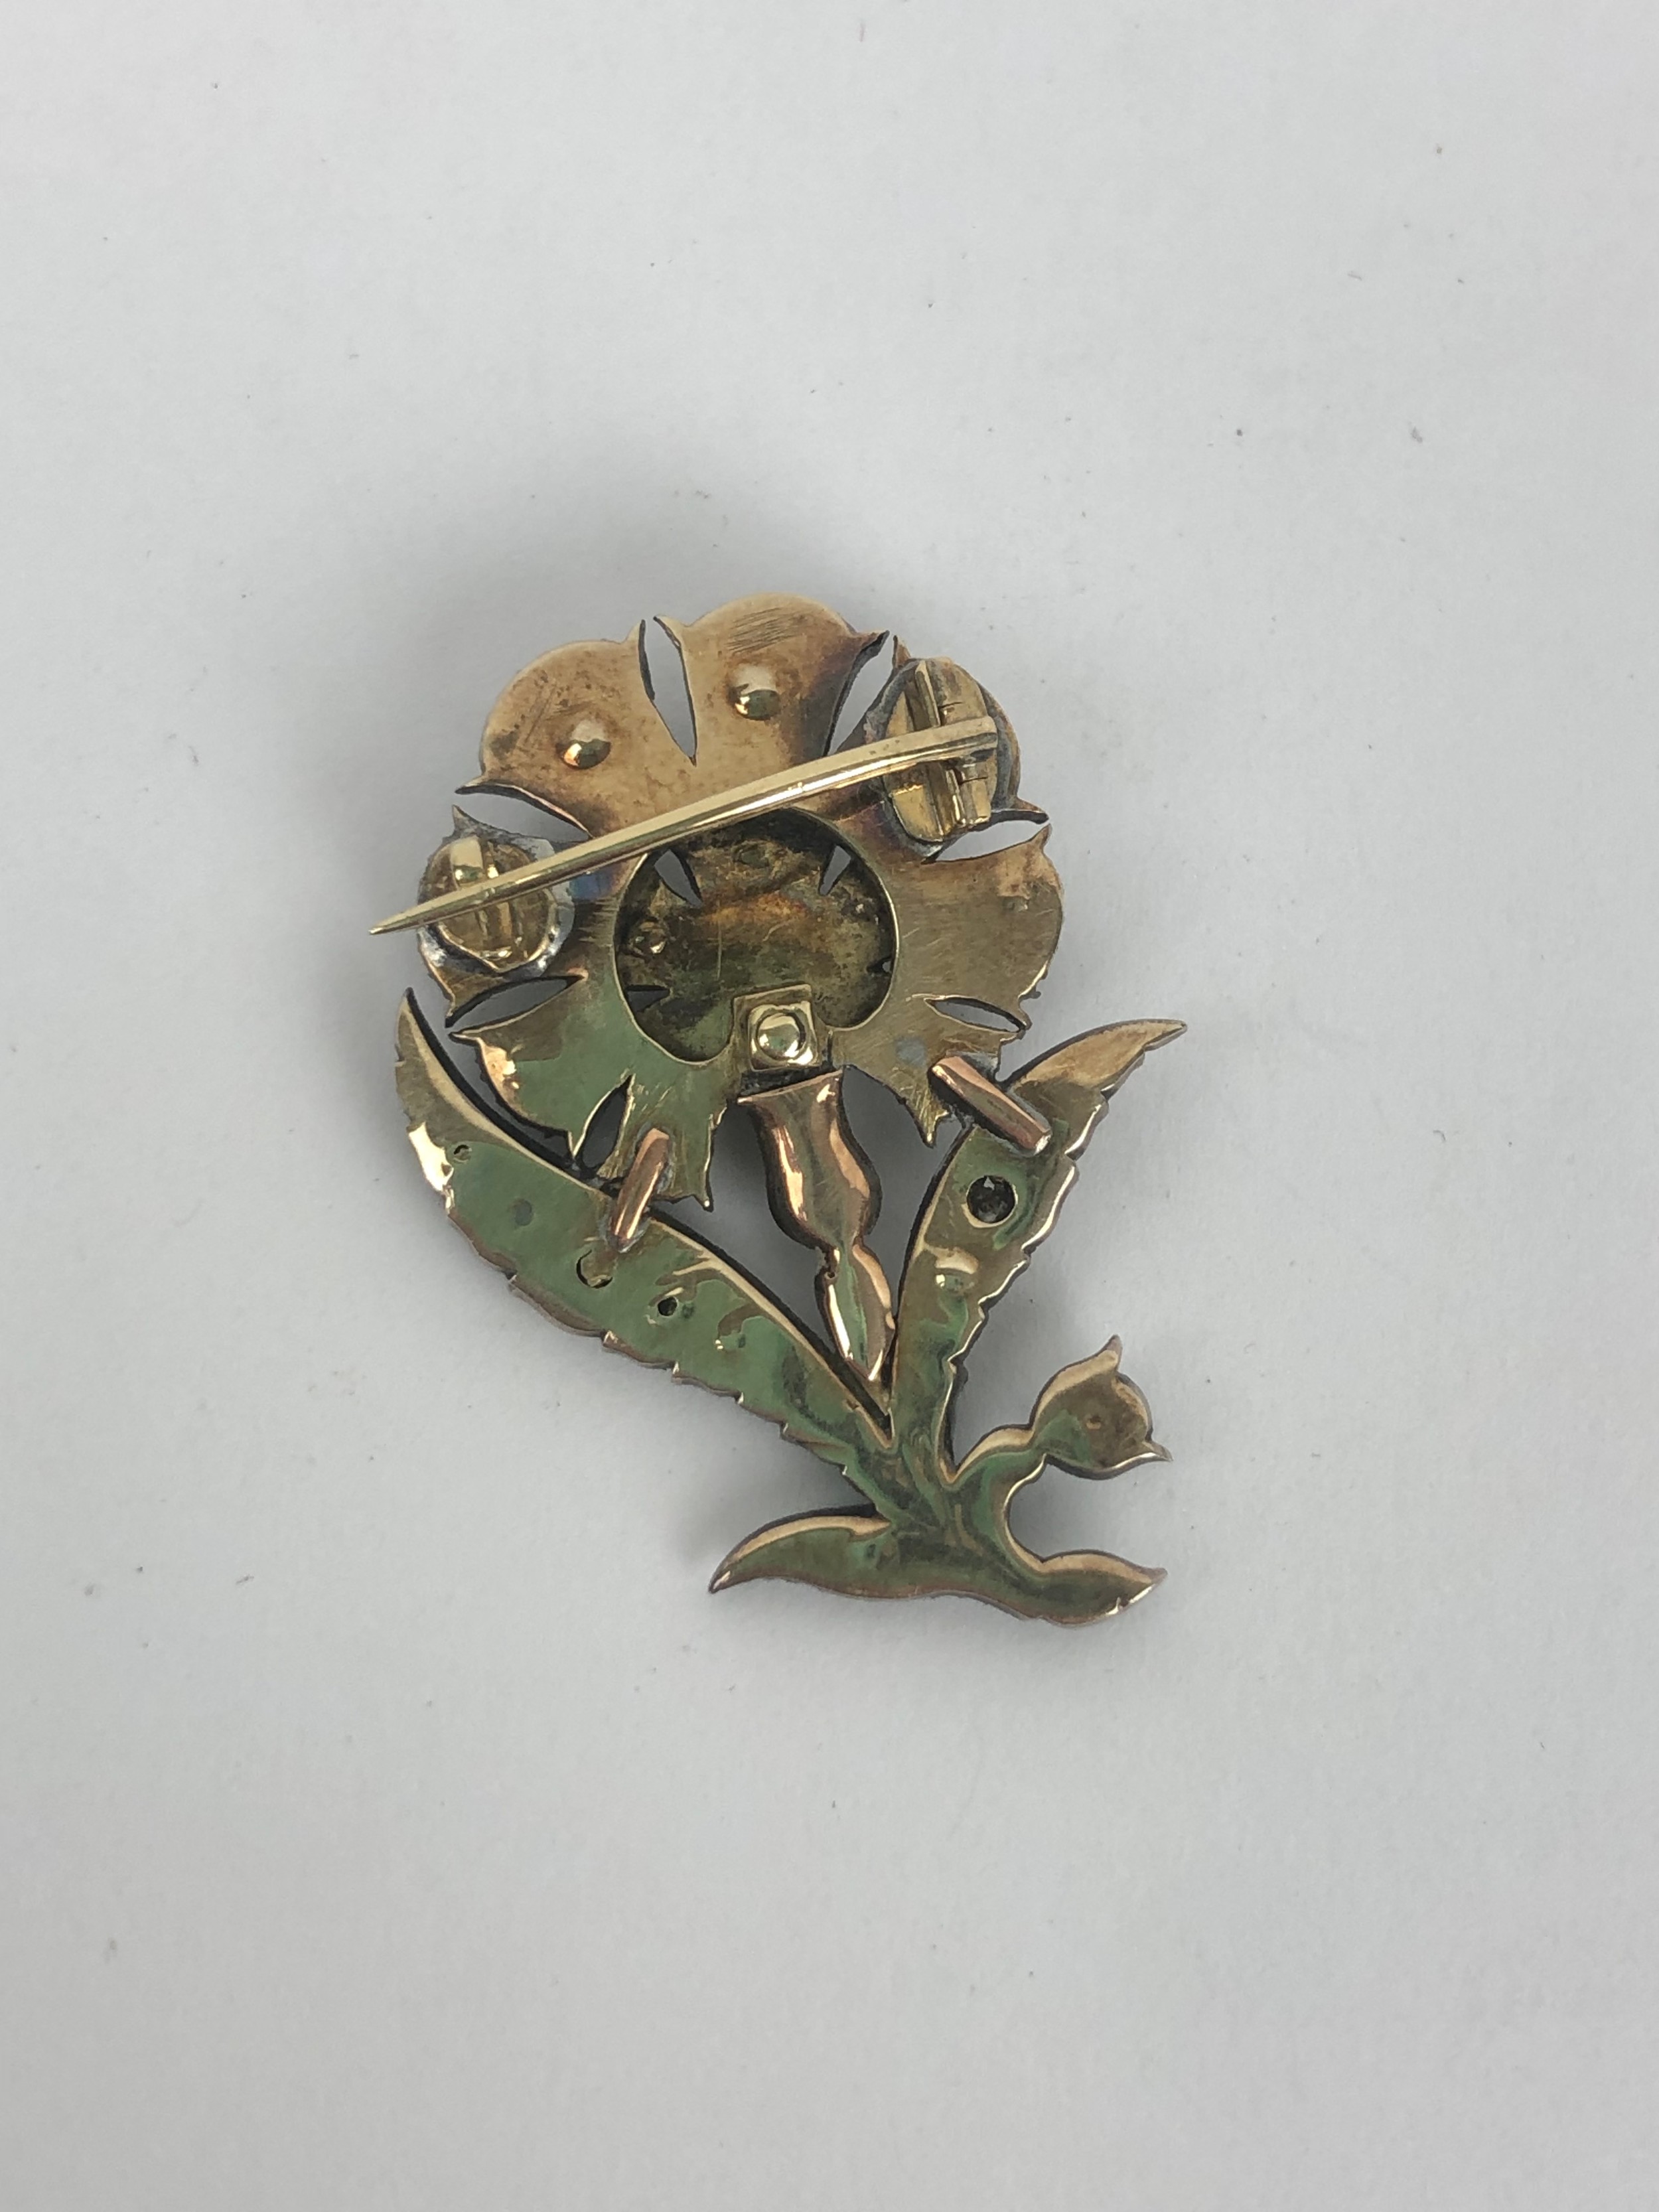 A 19th century diamond brooch, in the form of a flower 4.25 x 3 cm approx. weight: 8.5 g all in - Image 4 of 4